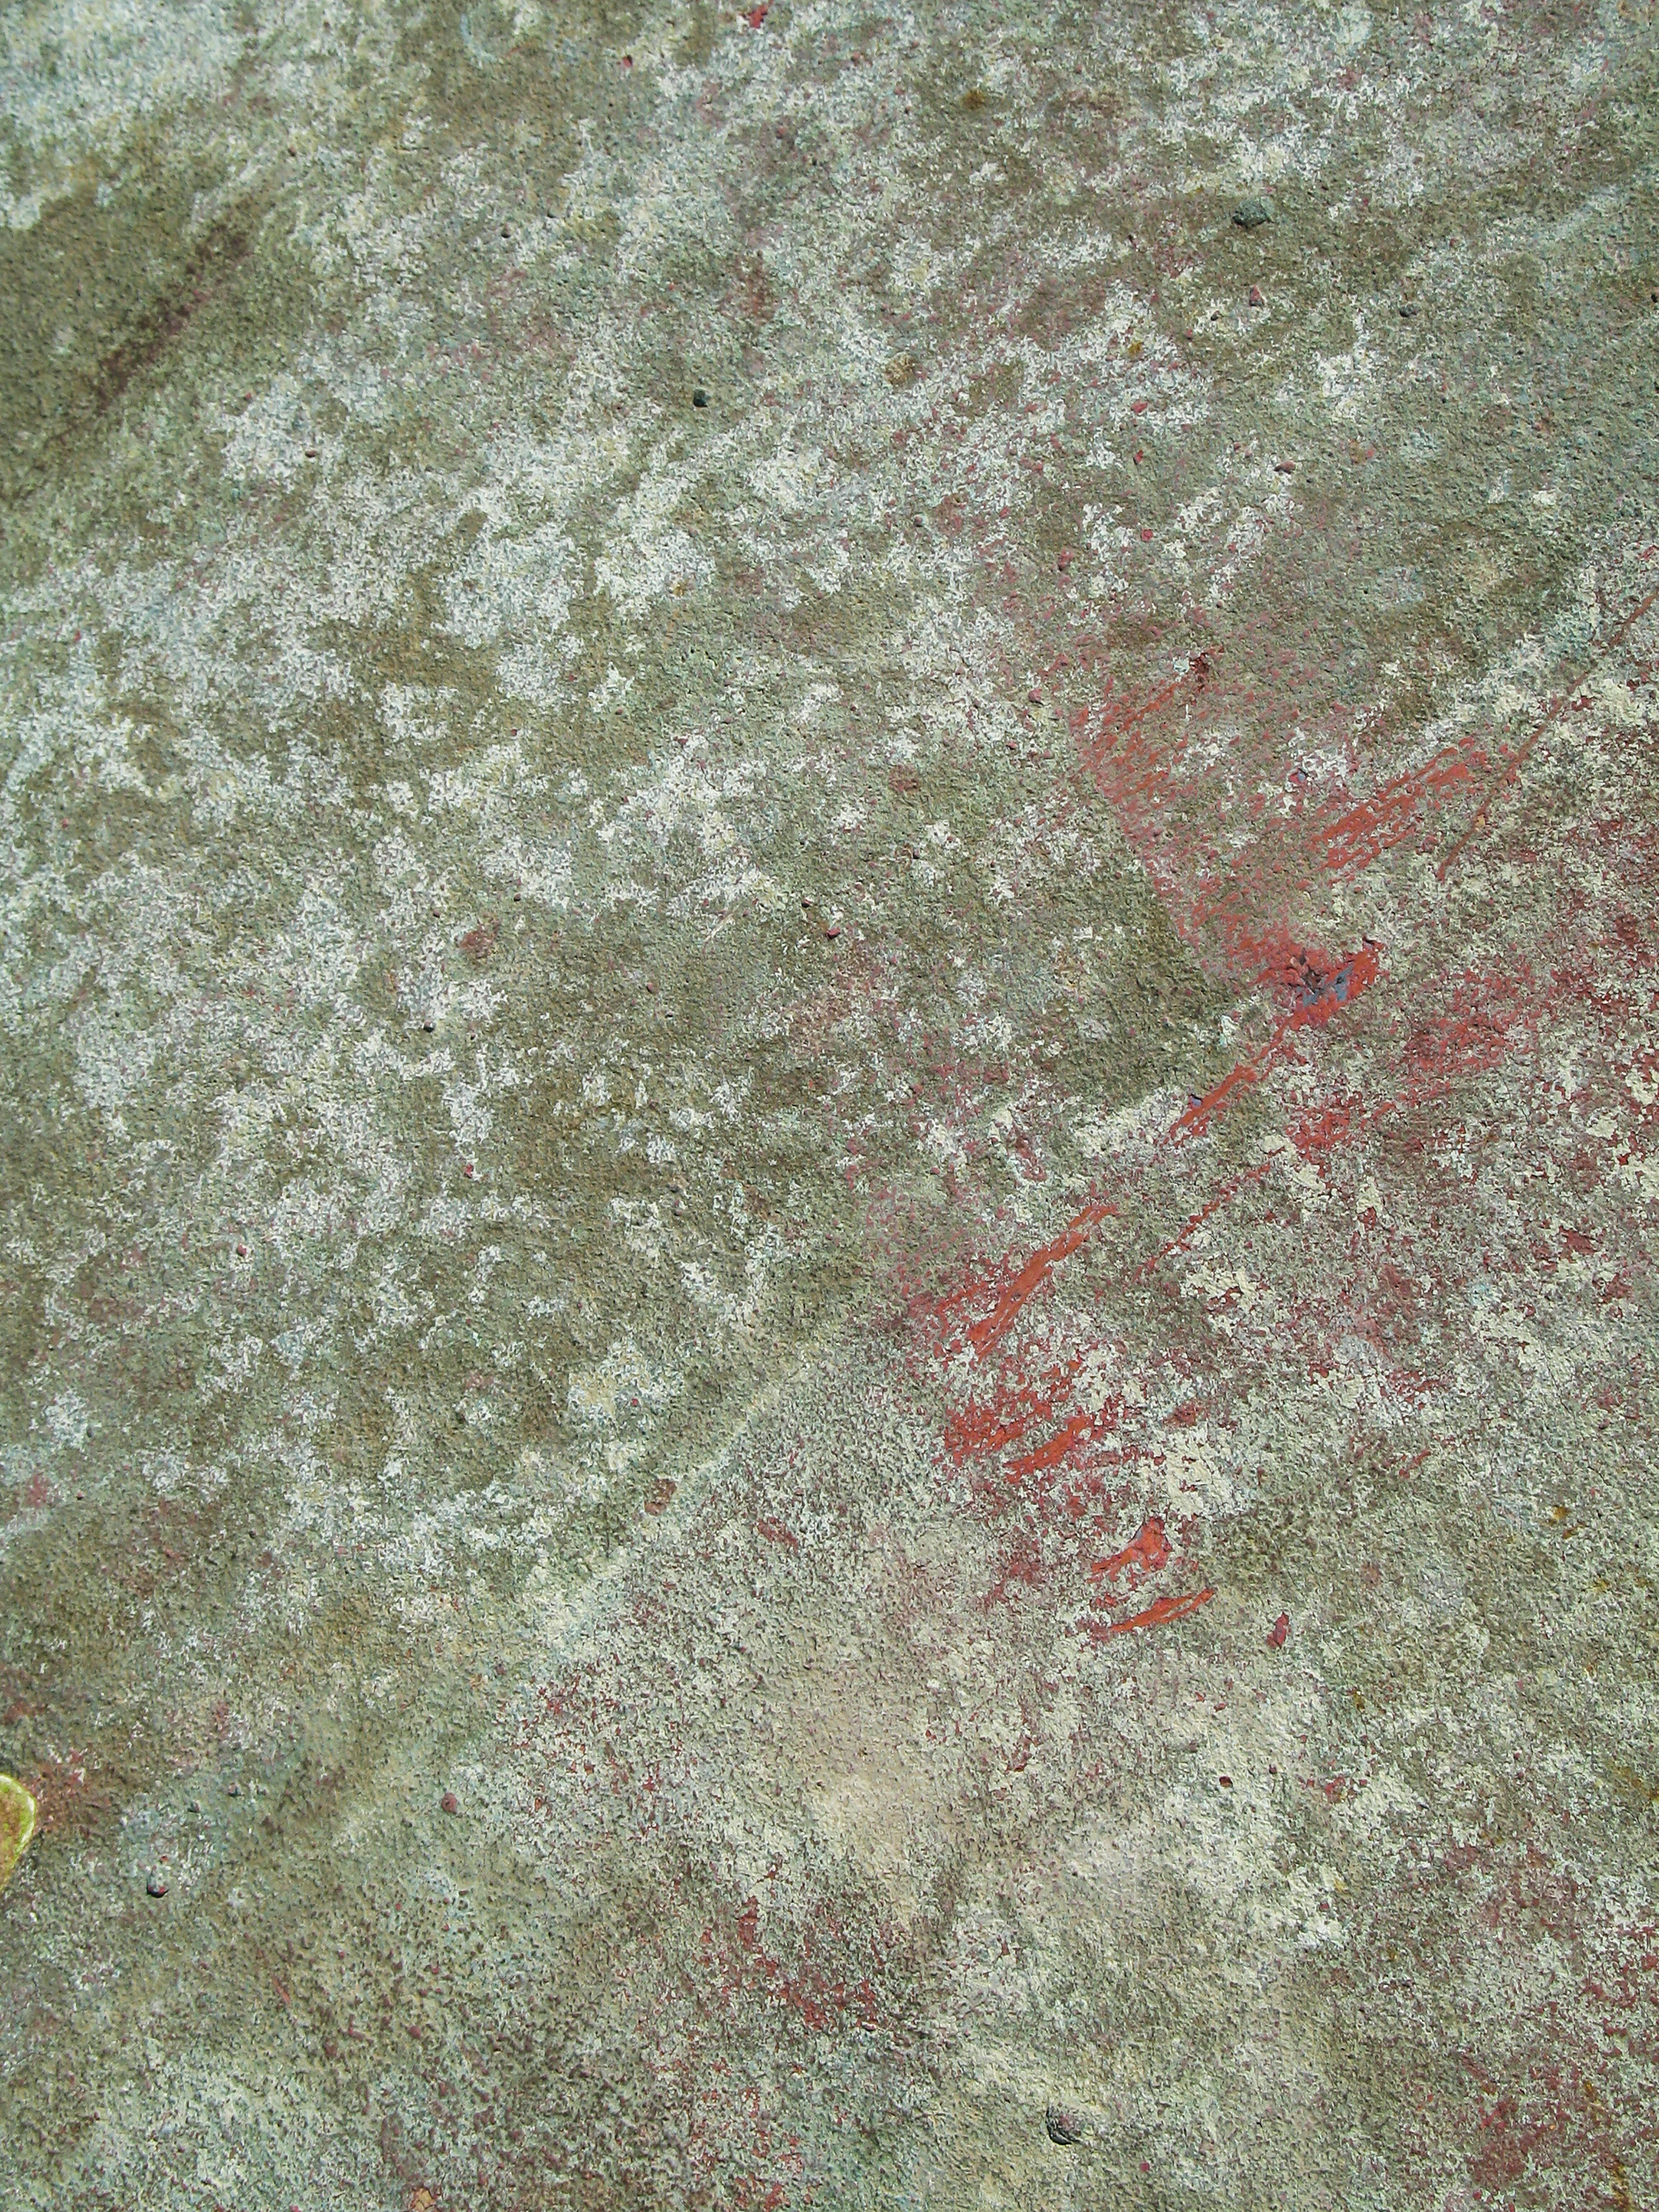 red and yellow powder on ground